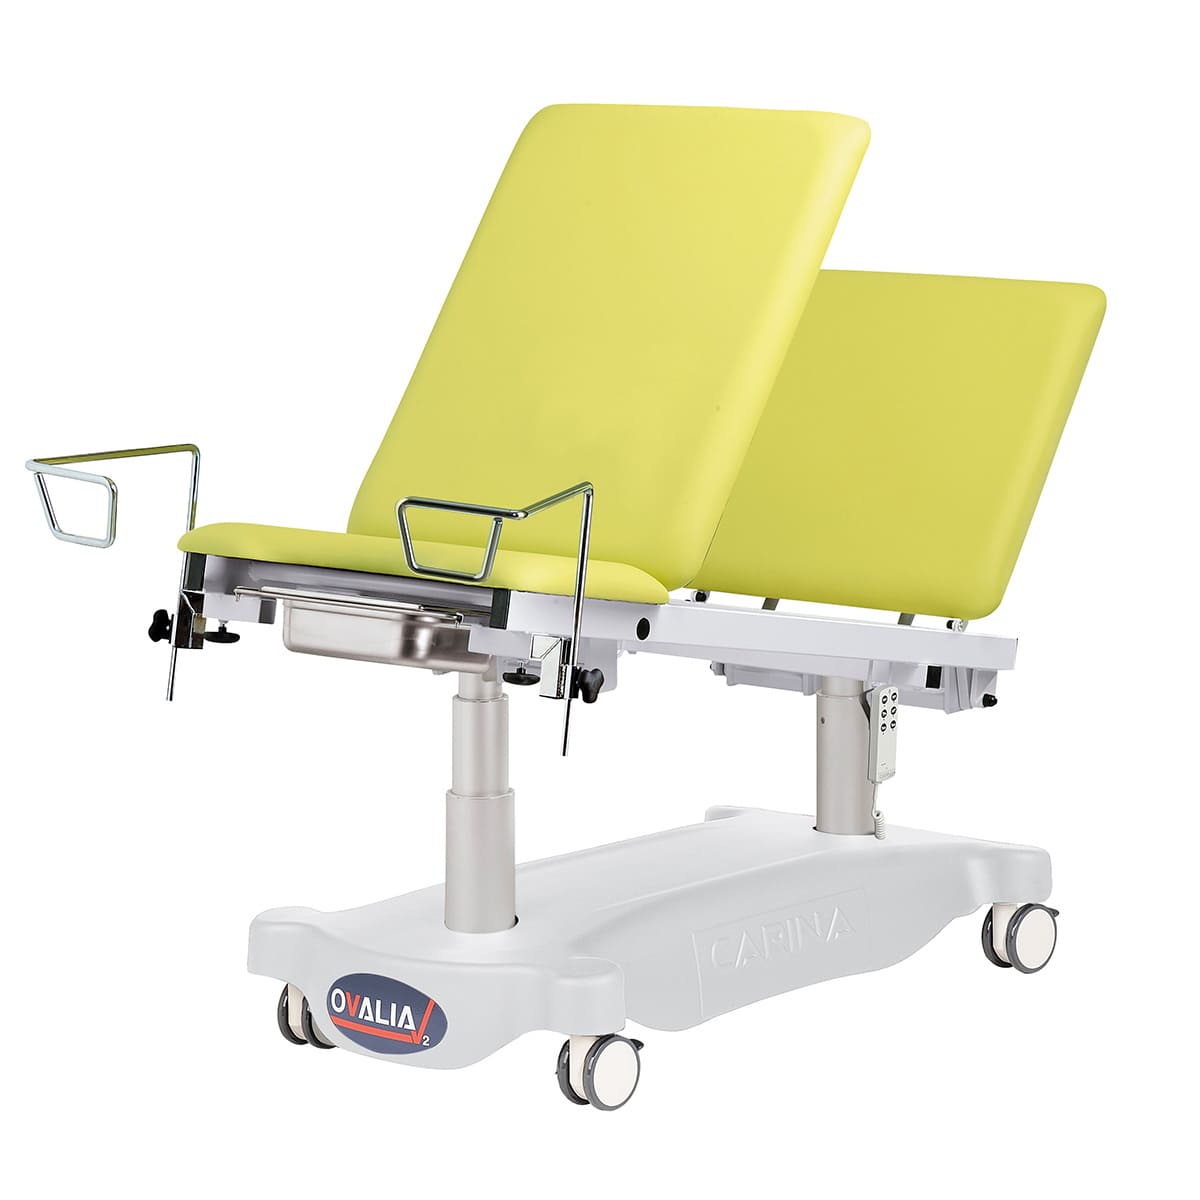 Examination couch width 80cm, hand remote